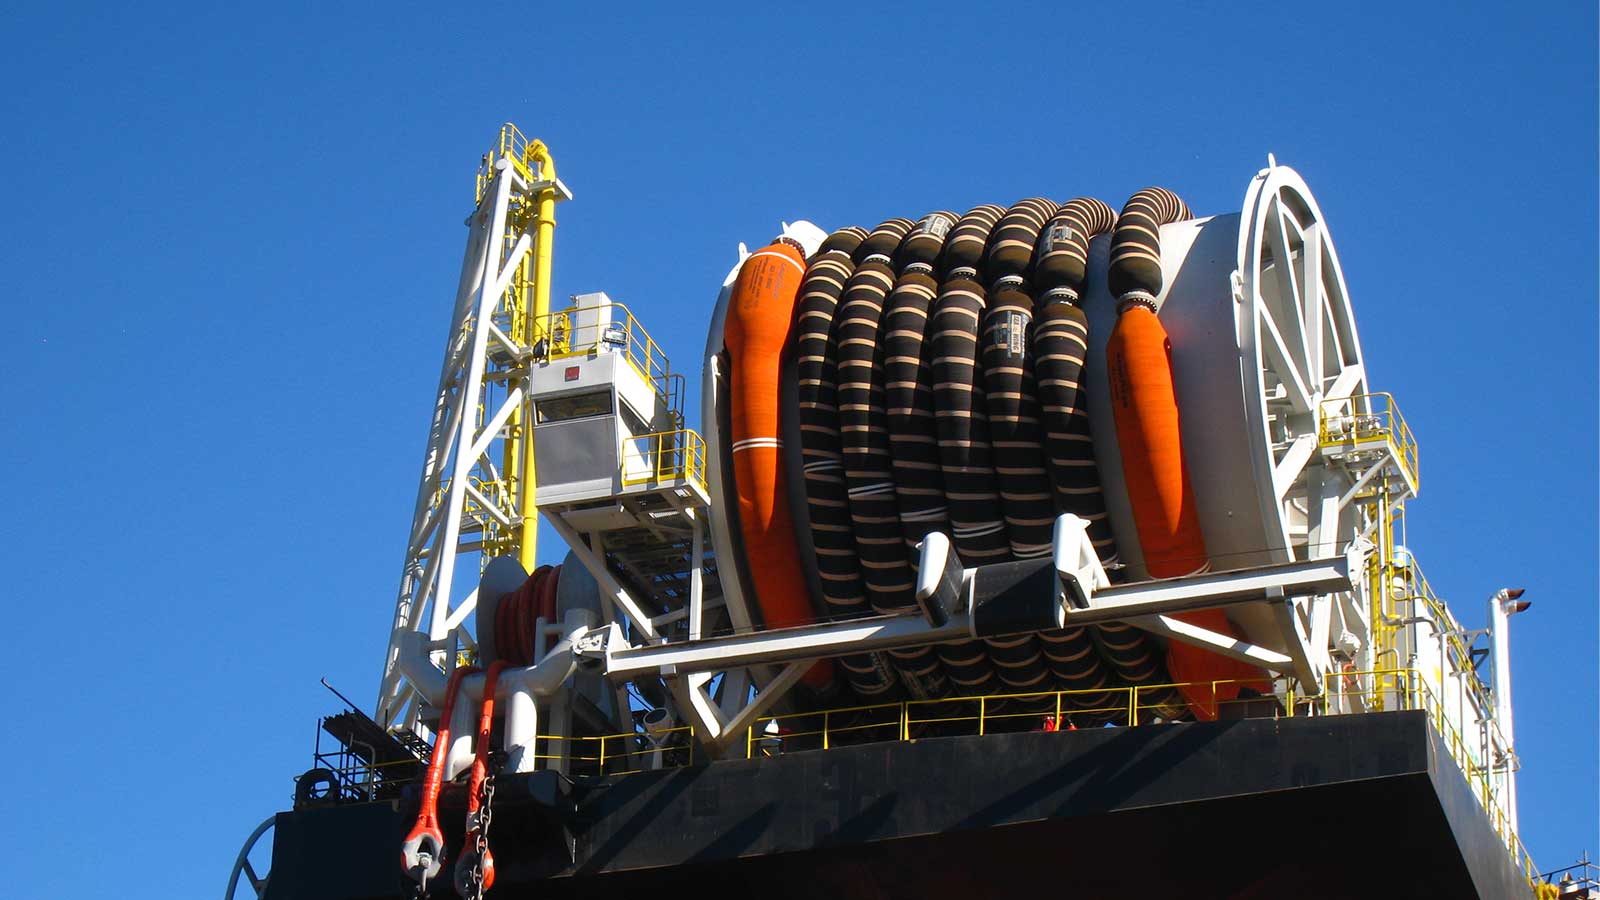 Royal IHC awarded contract for supply of offloading hose reel for Dana Petroleum